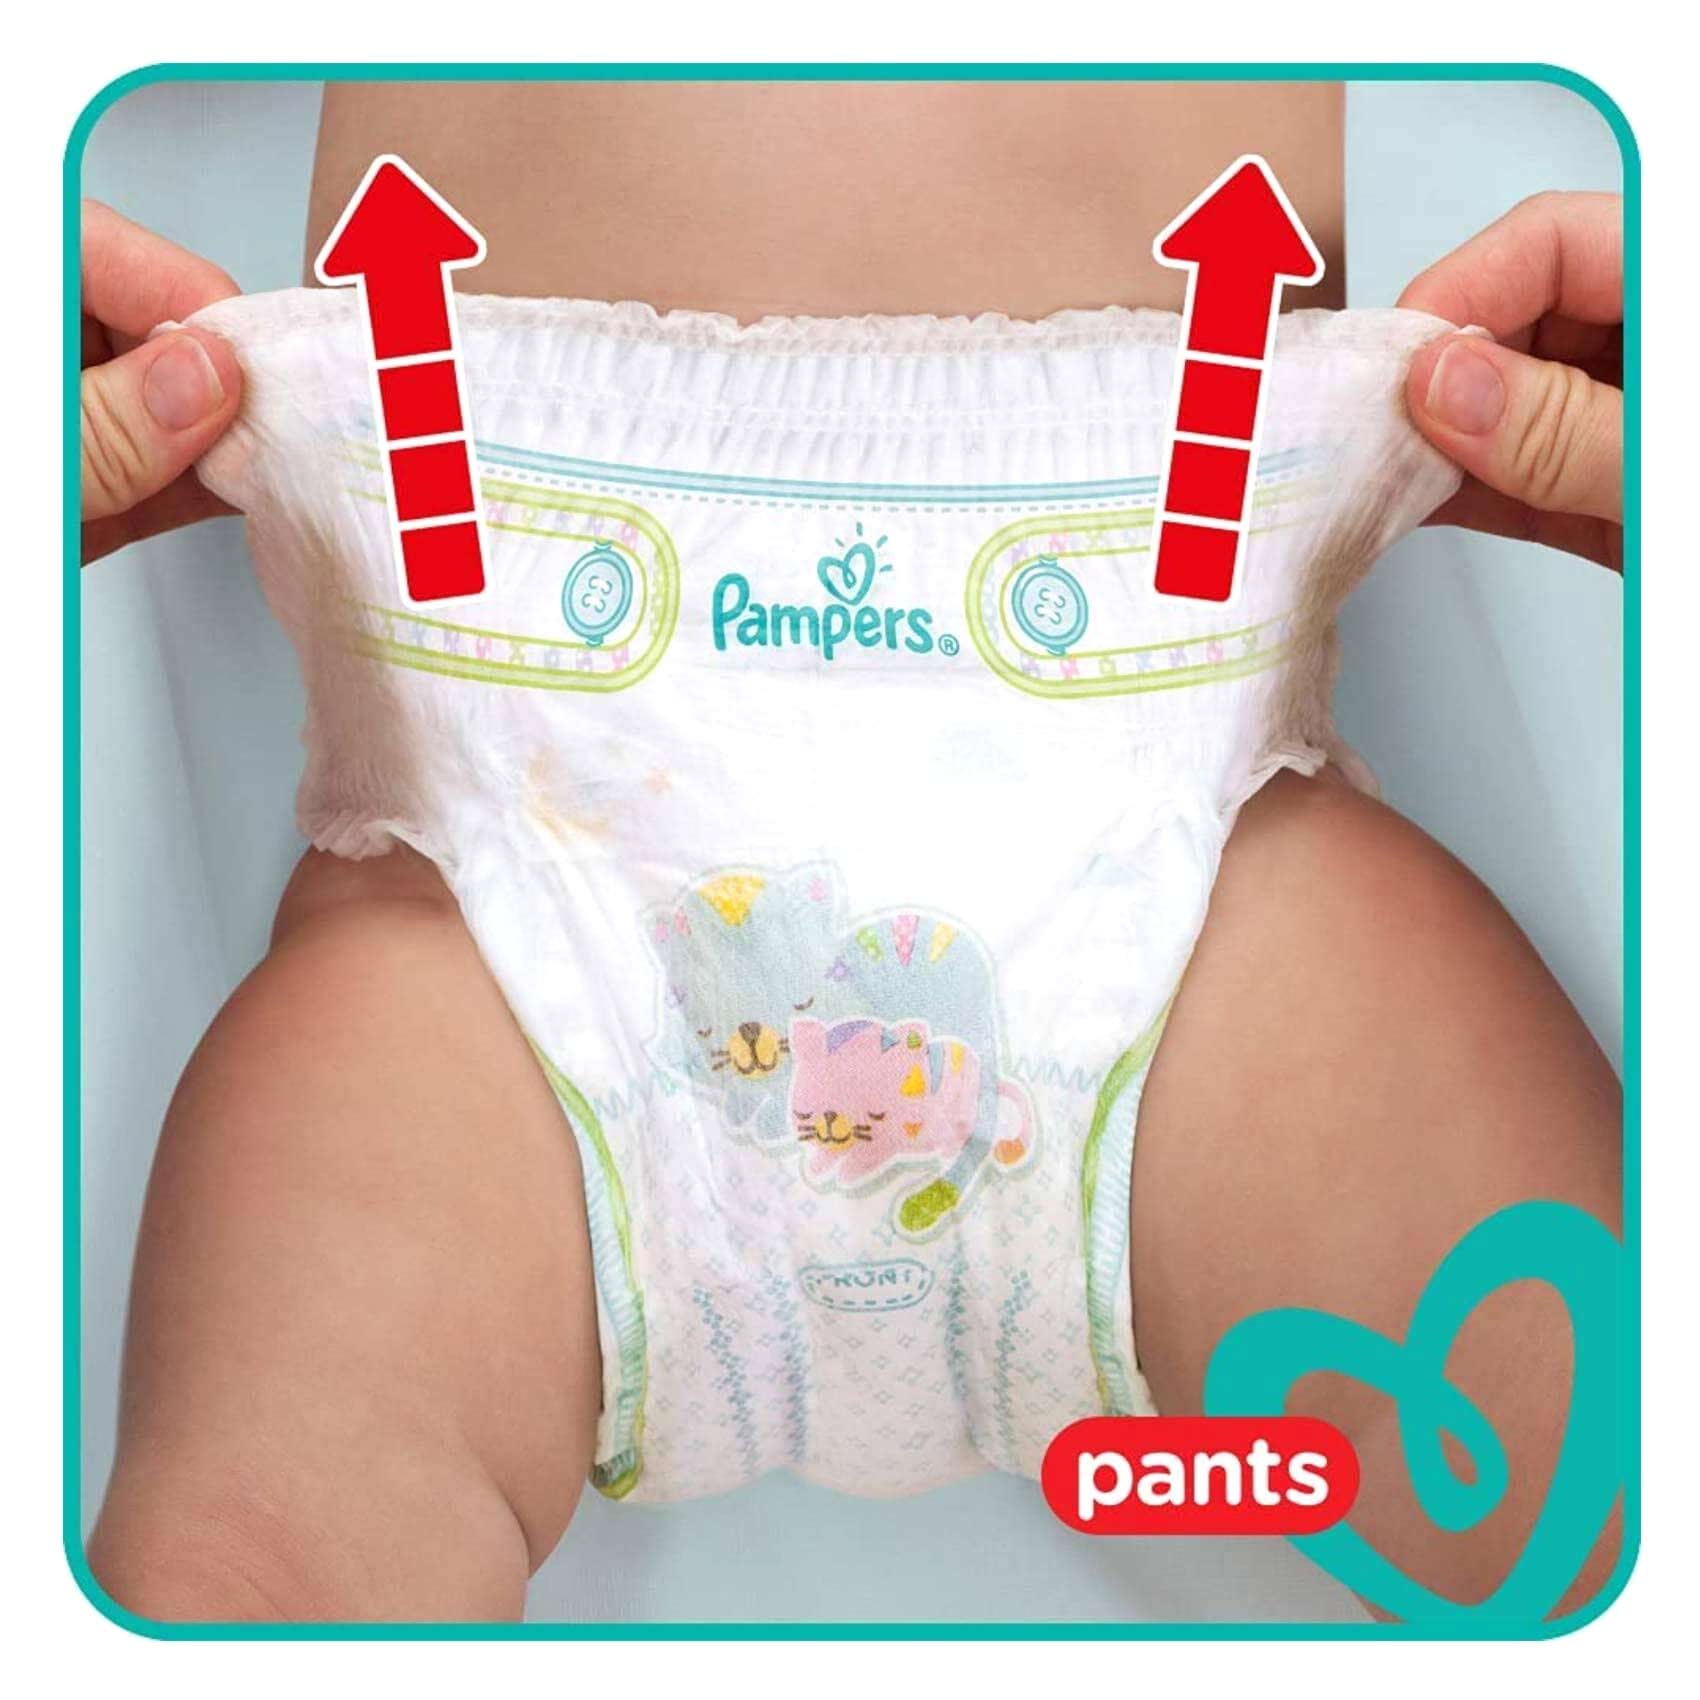 Pampers Baby Pants Diaper Medium Size 3, 58 Count 6-11 kg.